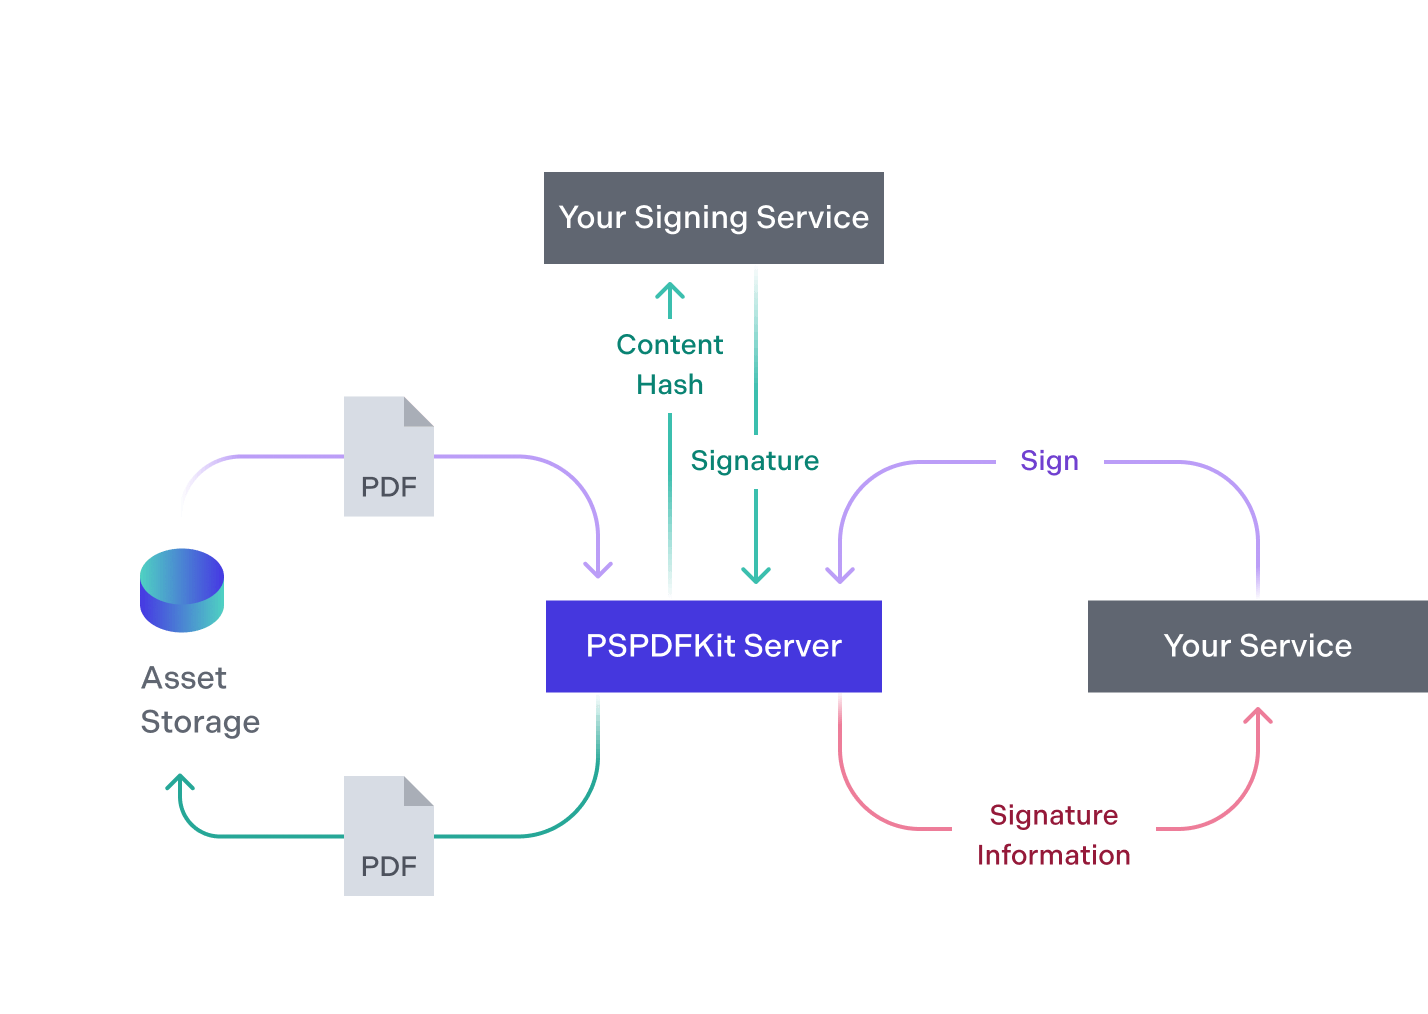 You digitally sign a document page and PSPDFKit Server stores the new PDF file